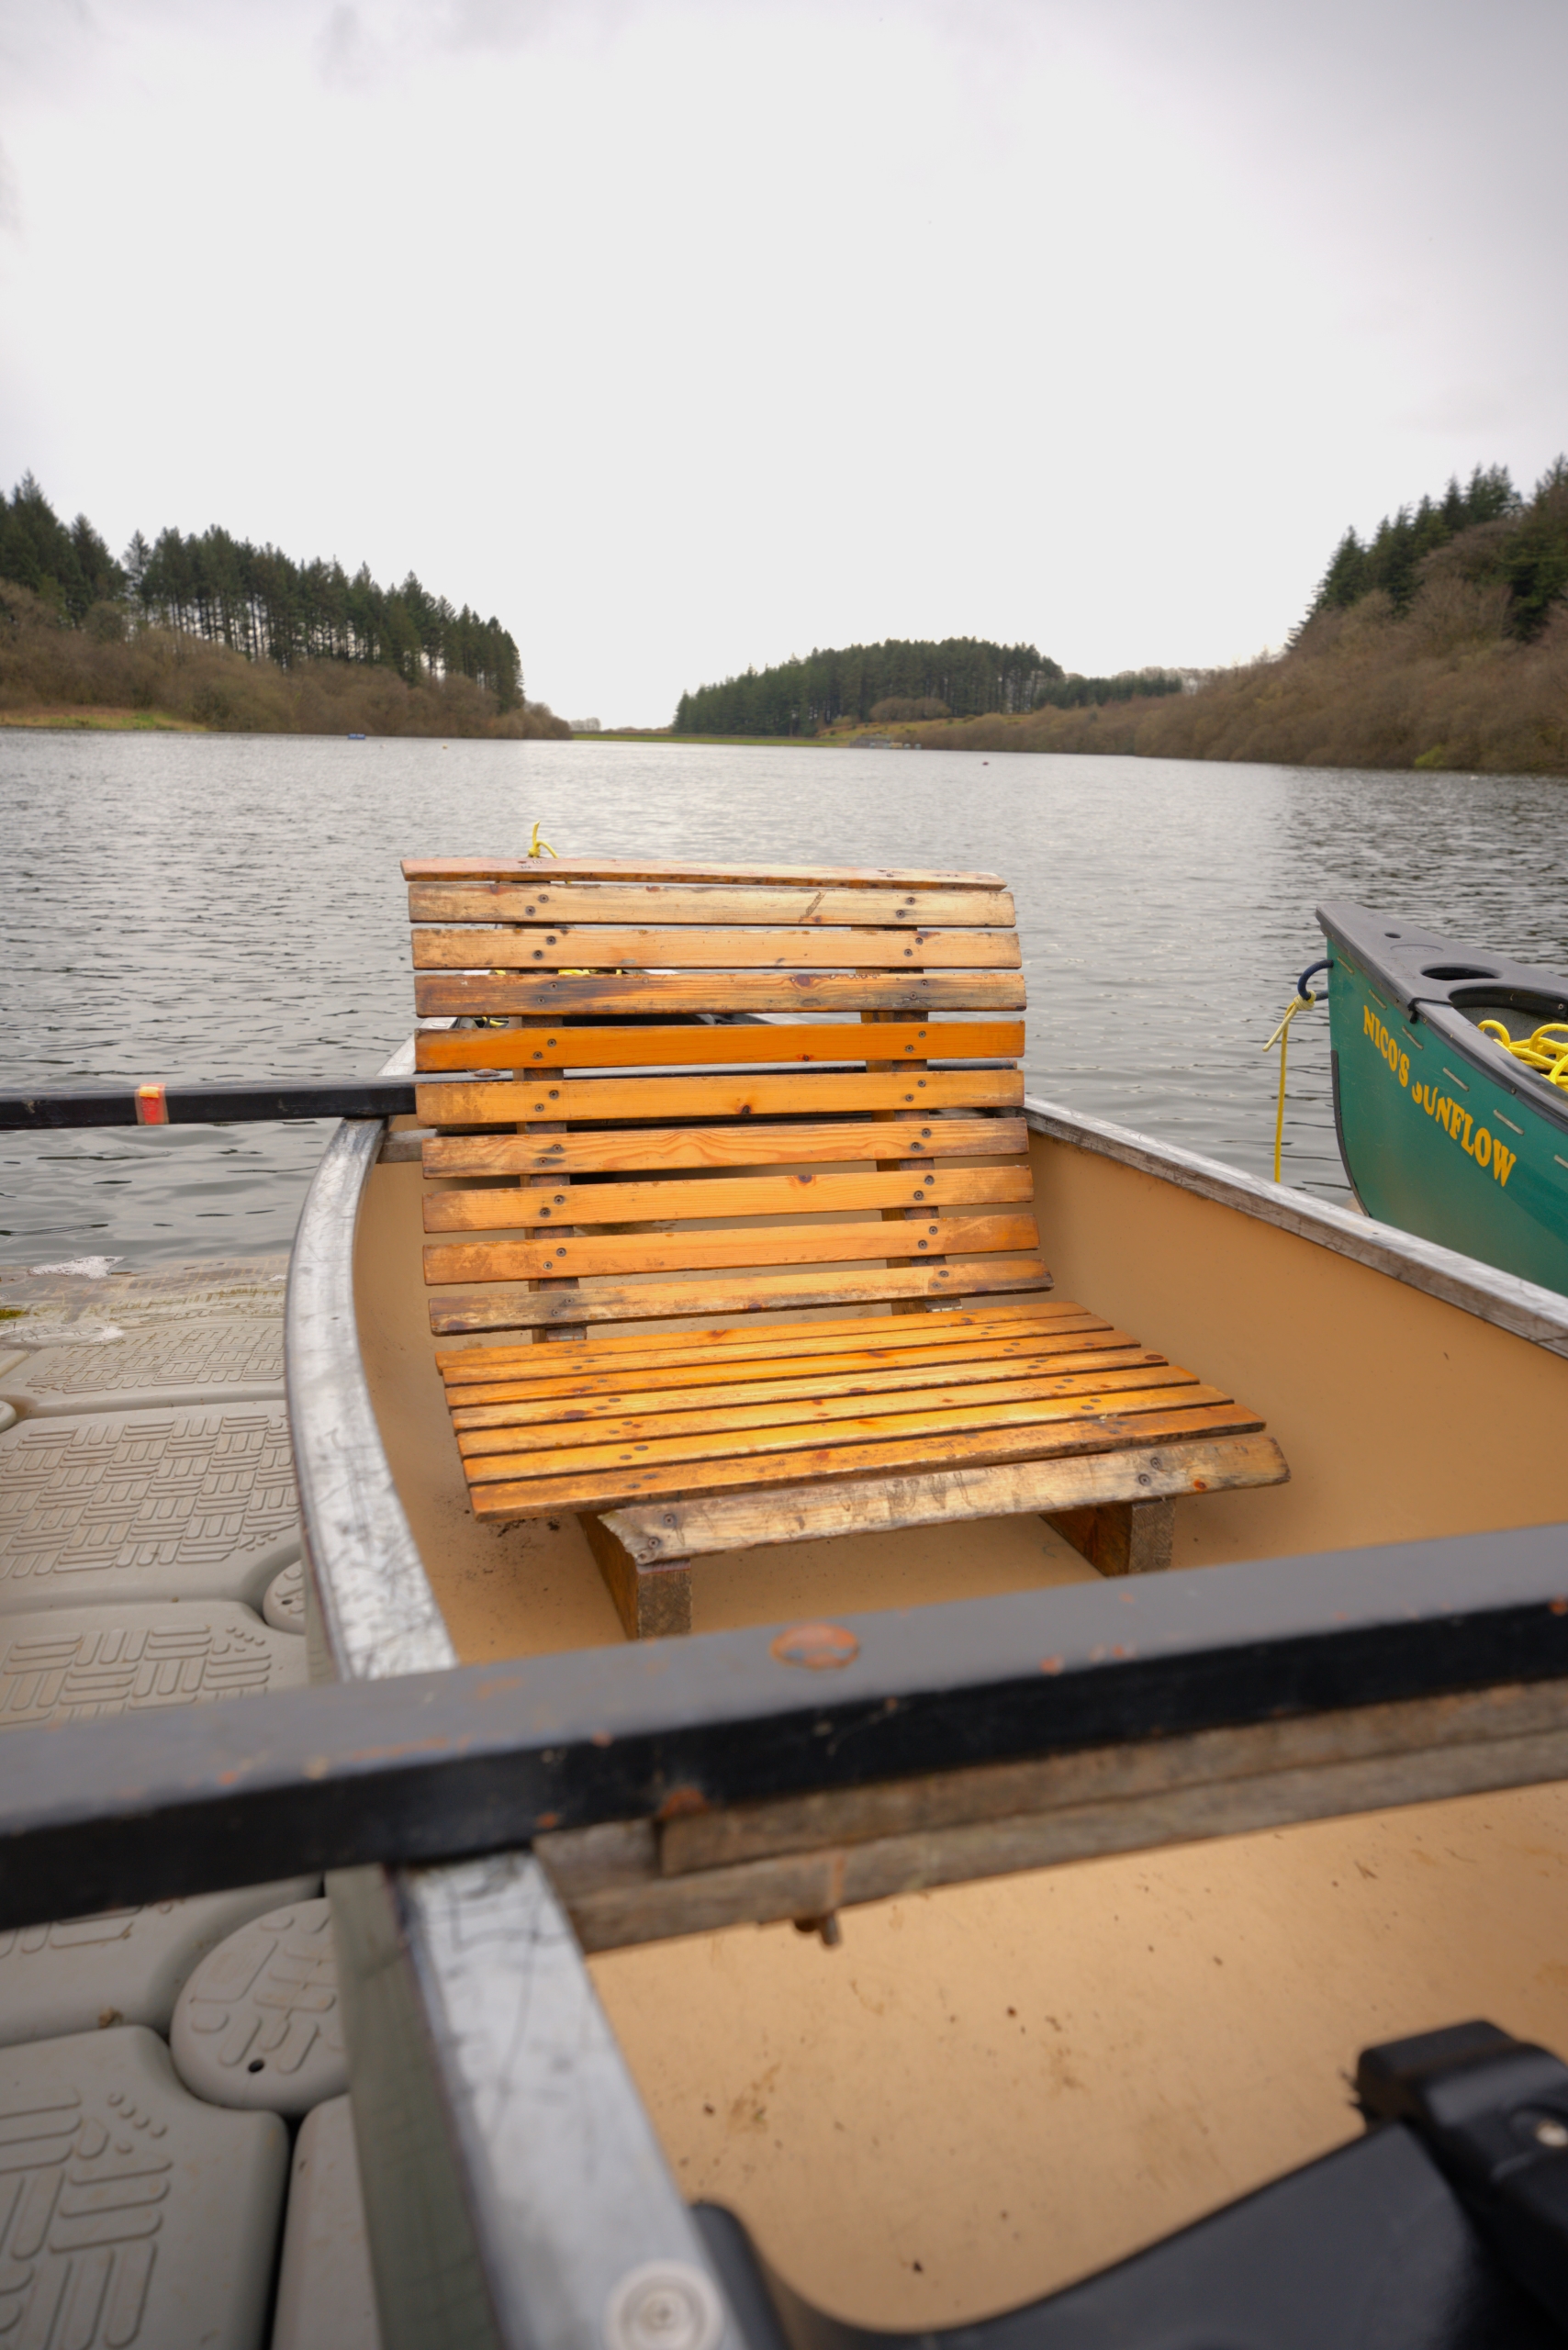 A wooden slatted seat inside a canoe on a jetty with the reservoir behind.